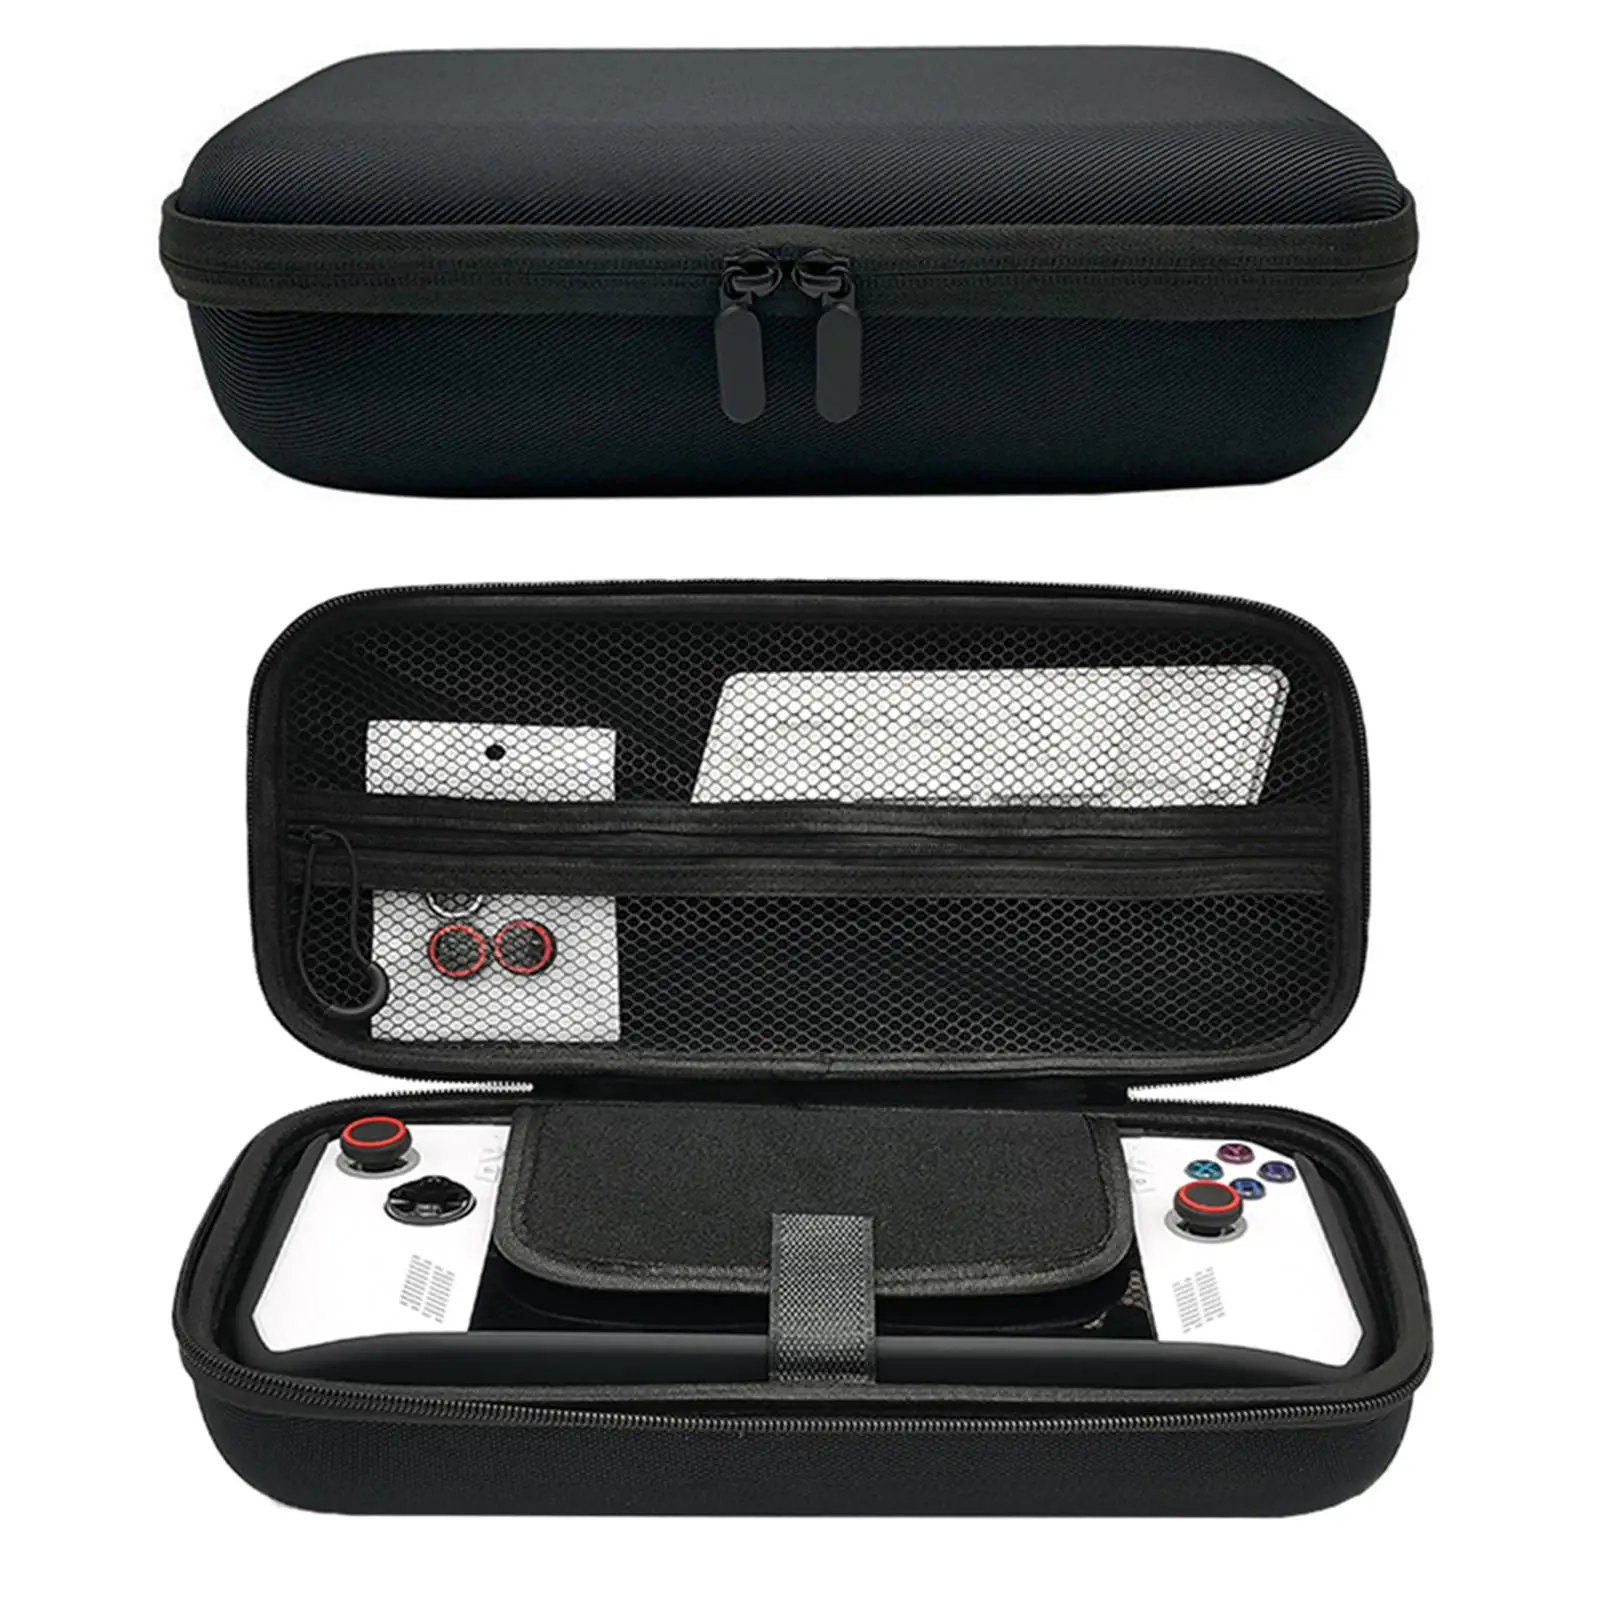 Handheld Game Console Carrying Case Easy to Carry Organizer Storage Case Game Machine Accessories Portable Shockproof Hard Shell